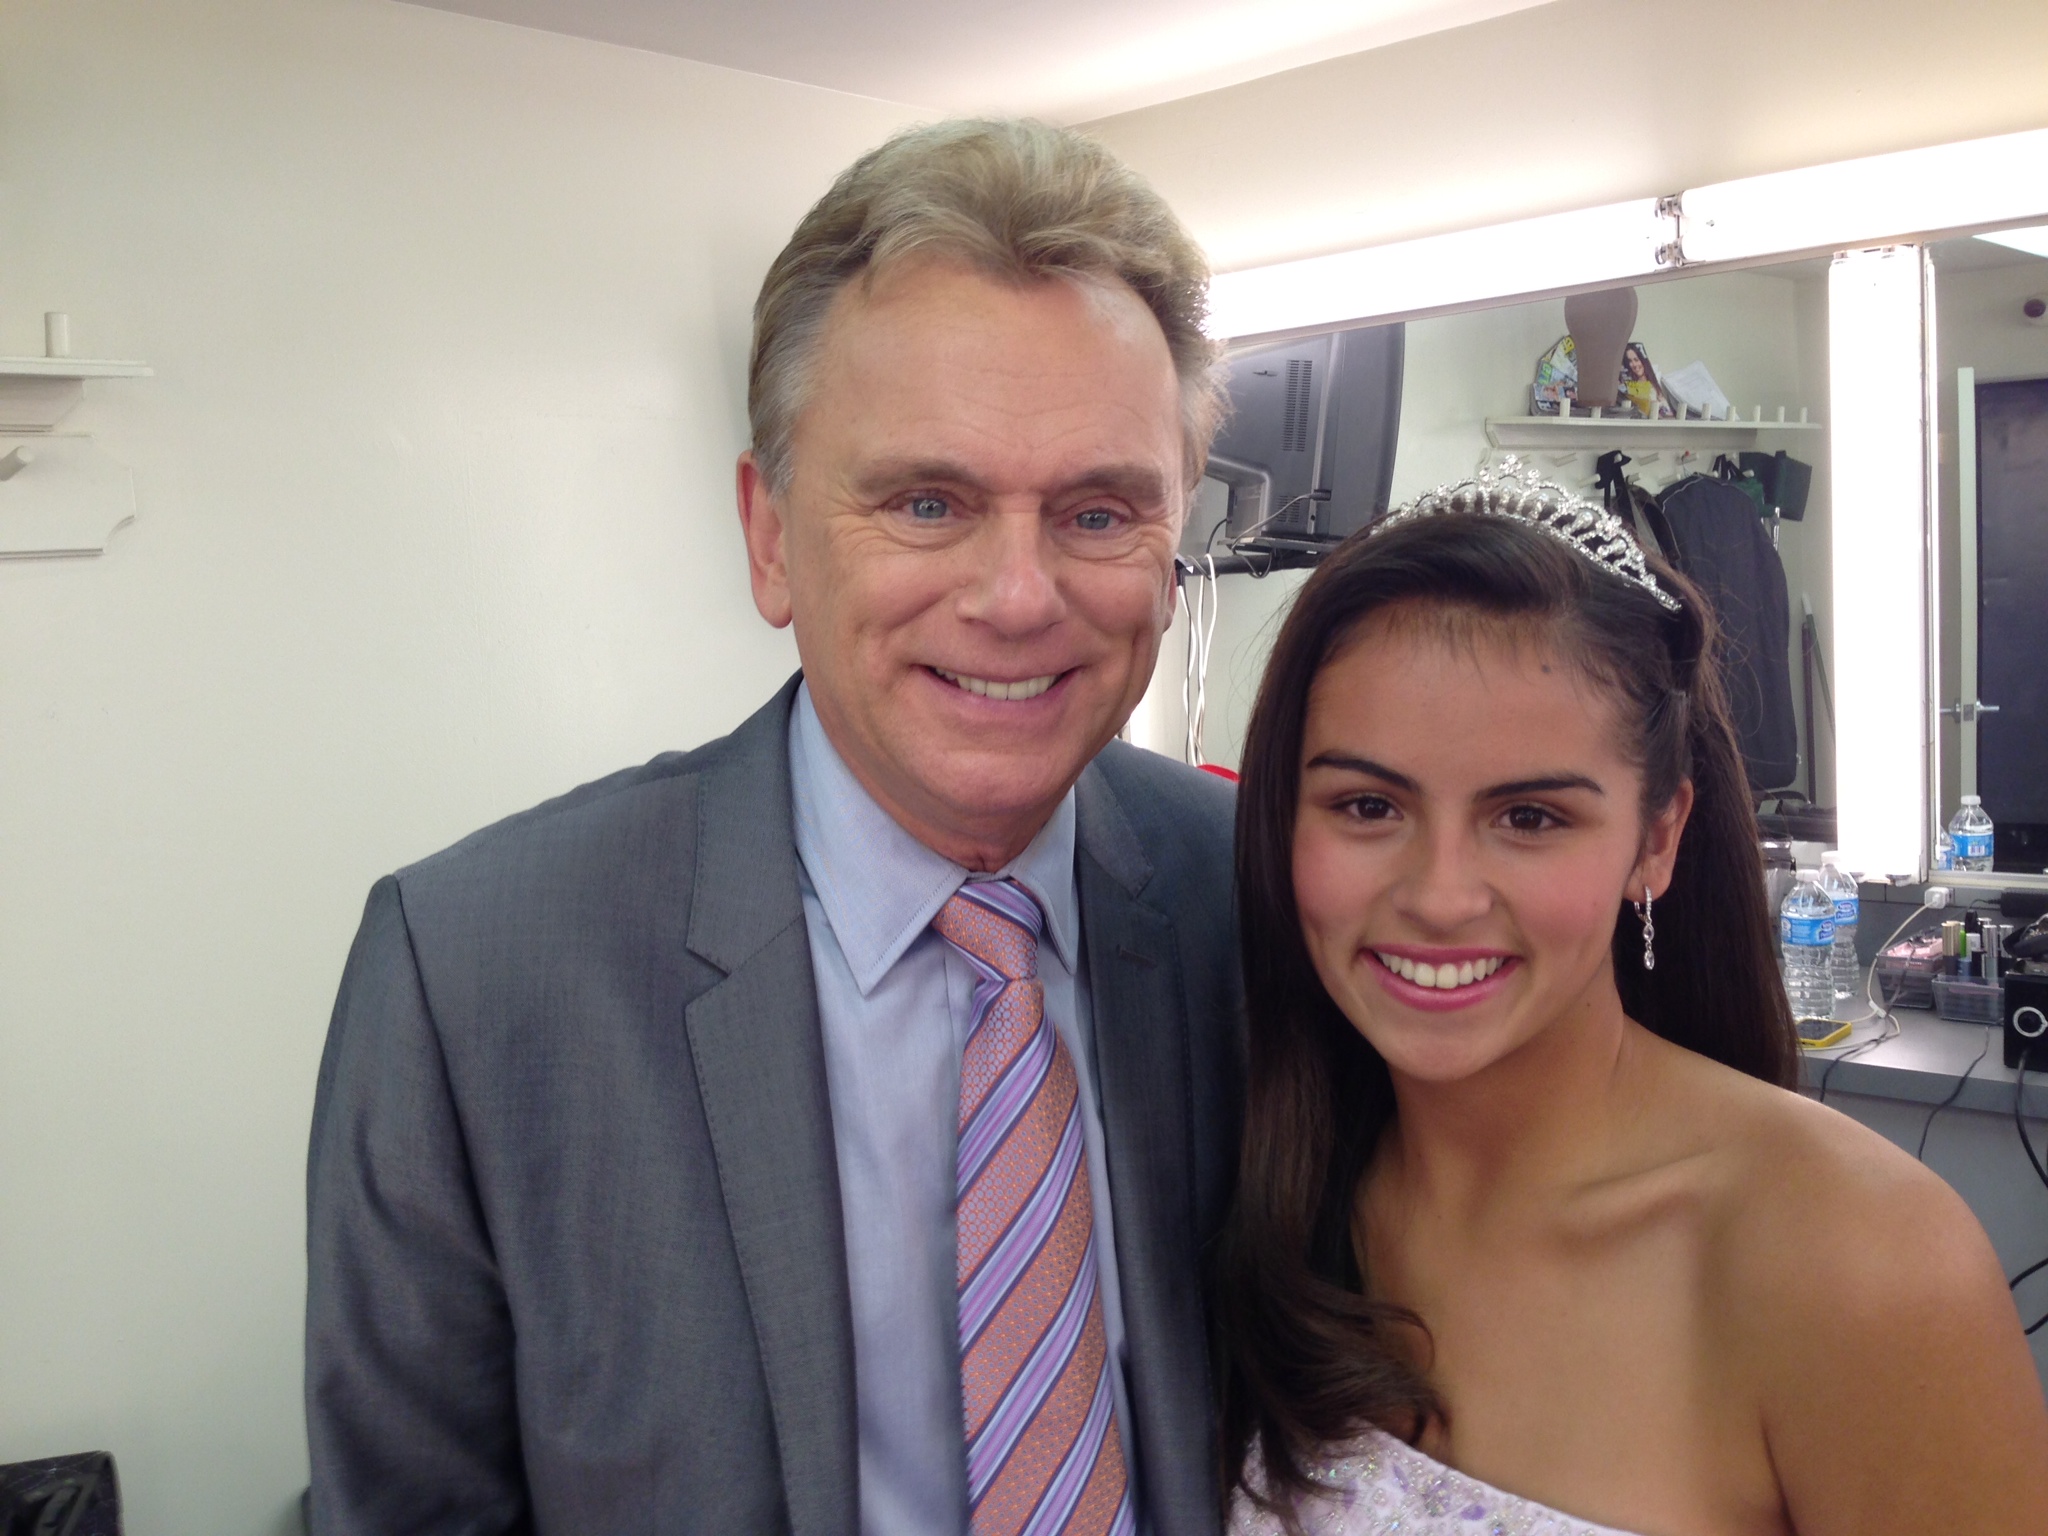 Lexi with Pat Sajak